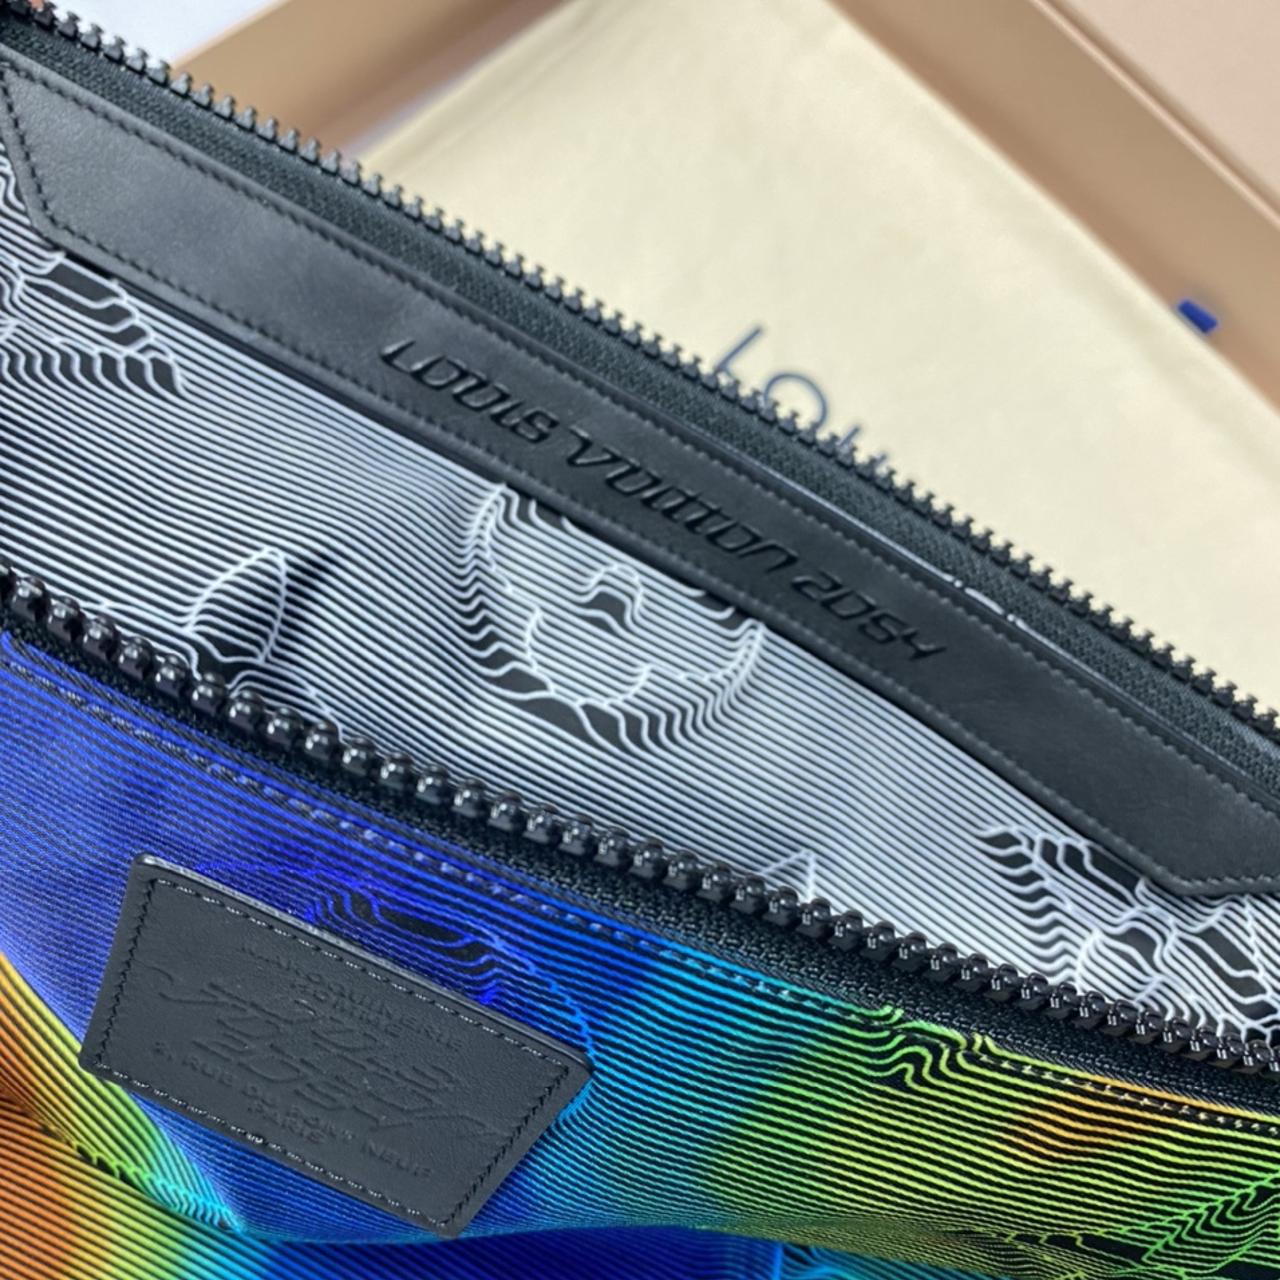 Louis Vuitton 2054 Reversible Pouch Sold out and - Depop